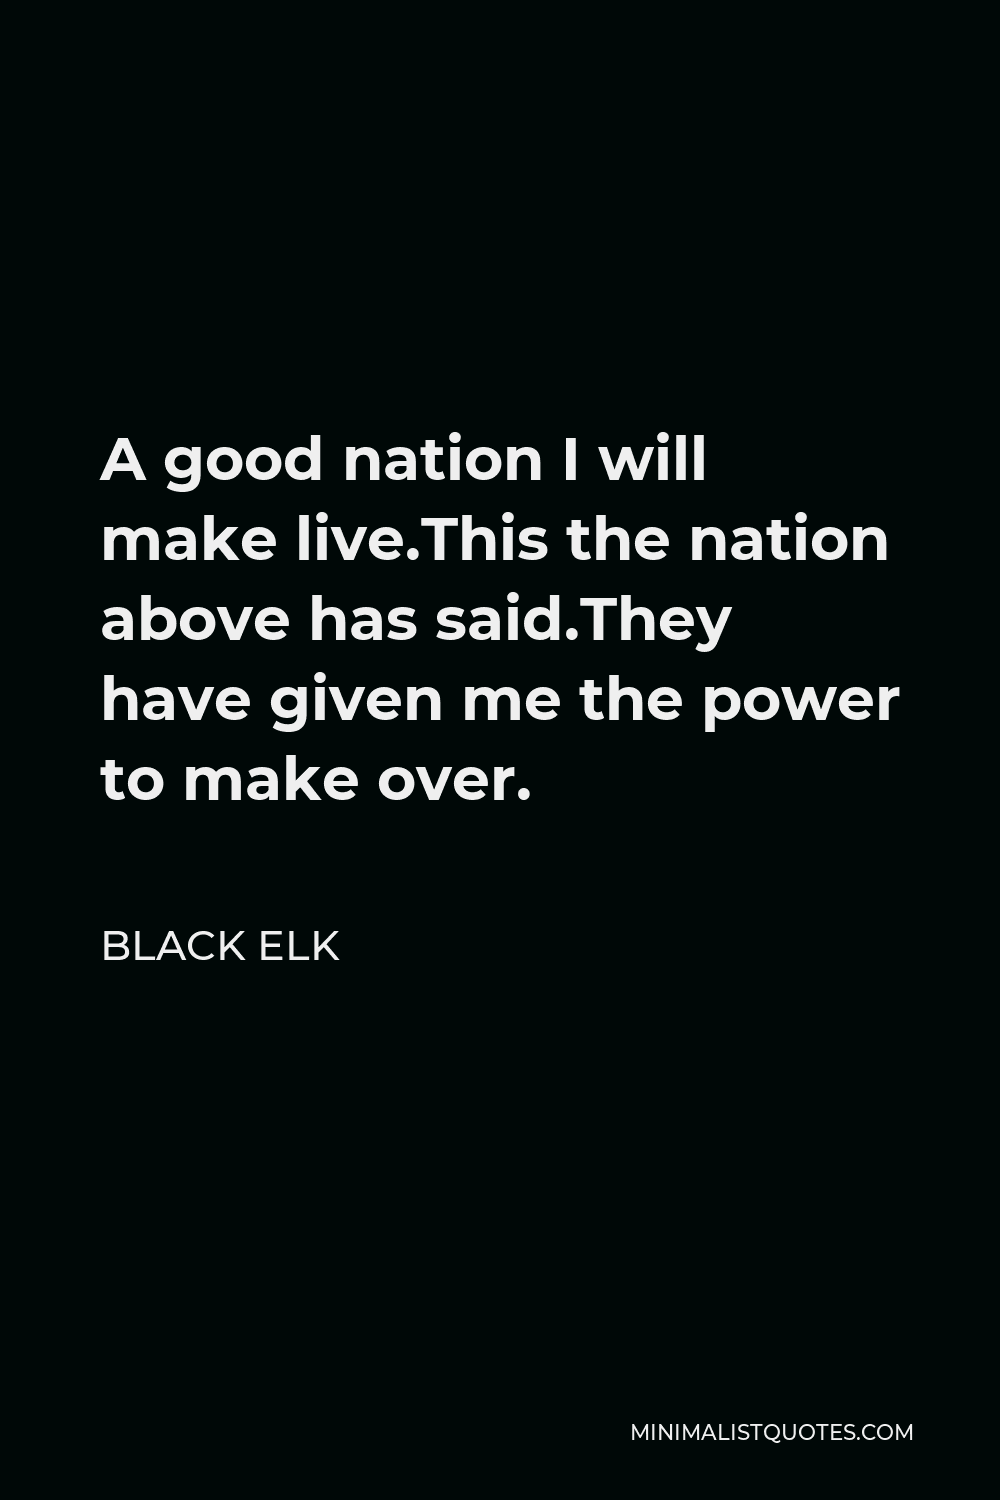 Black Elk Quote - A good nation I will make live.This the nation above has said.They have given me the power to make over.